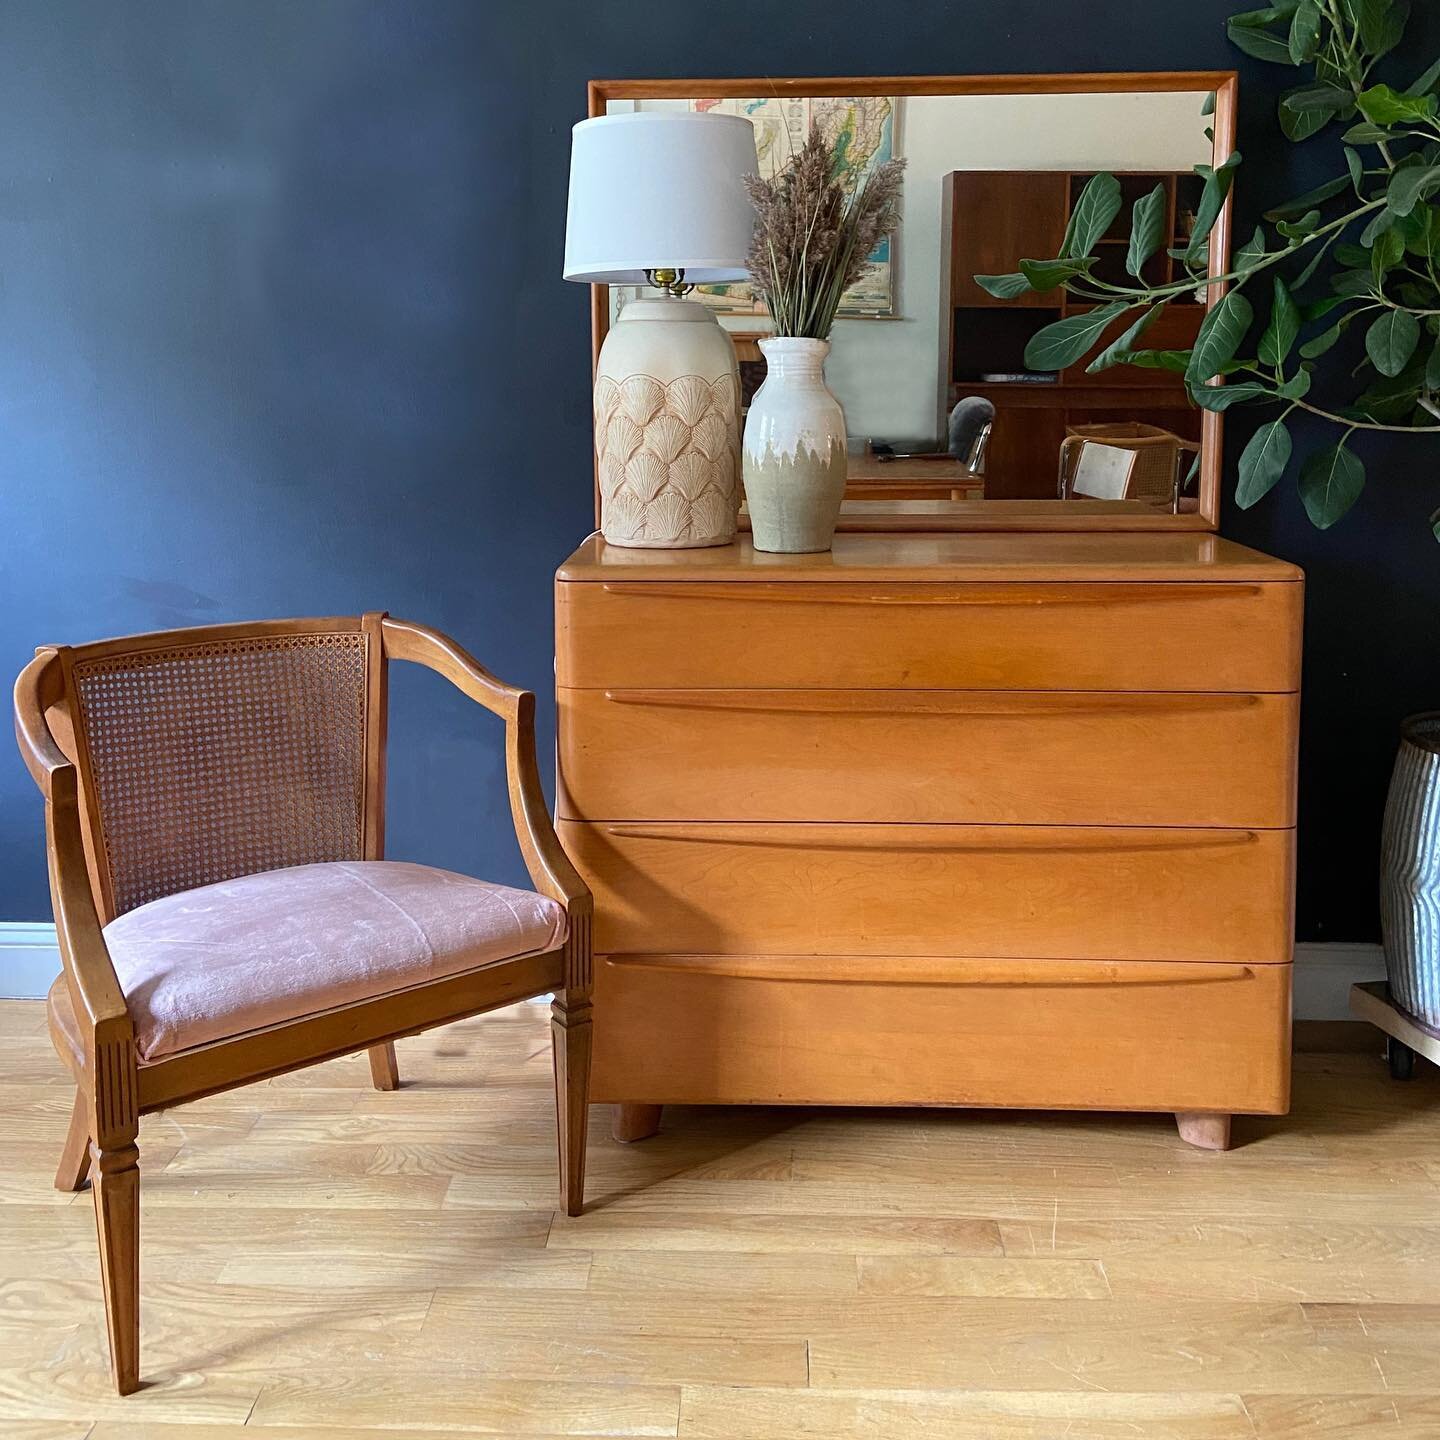 Can&rsquo;t resist the classic and clean lines of these Heywood Wakefield pieces. 

Wakefield dresser with mirror SOLD

Pink Velvet &amp; Cane Armchair SOLD
Shell Lamp $125